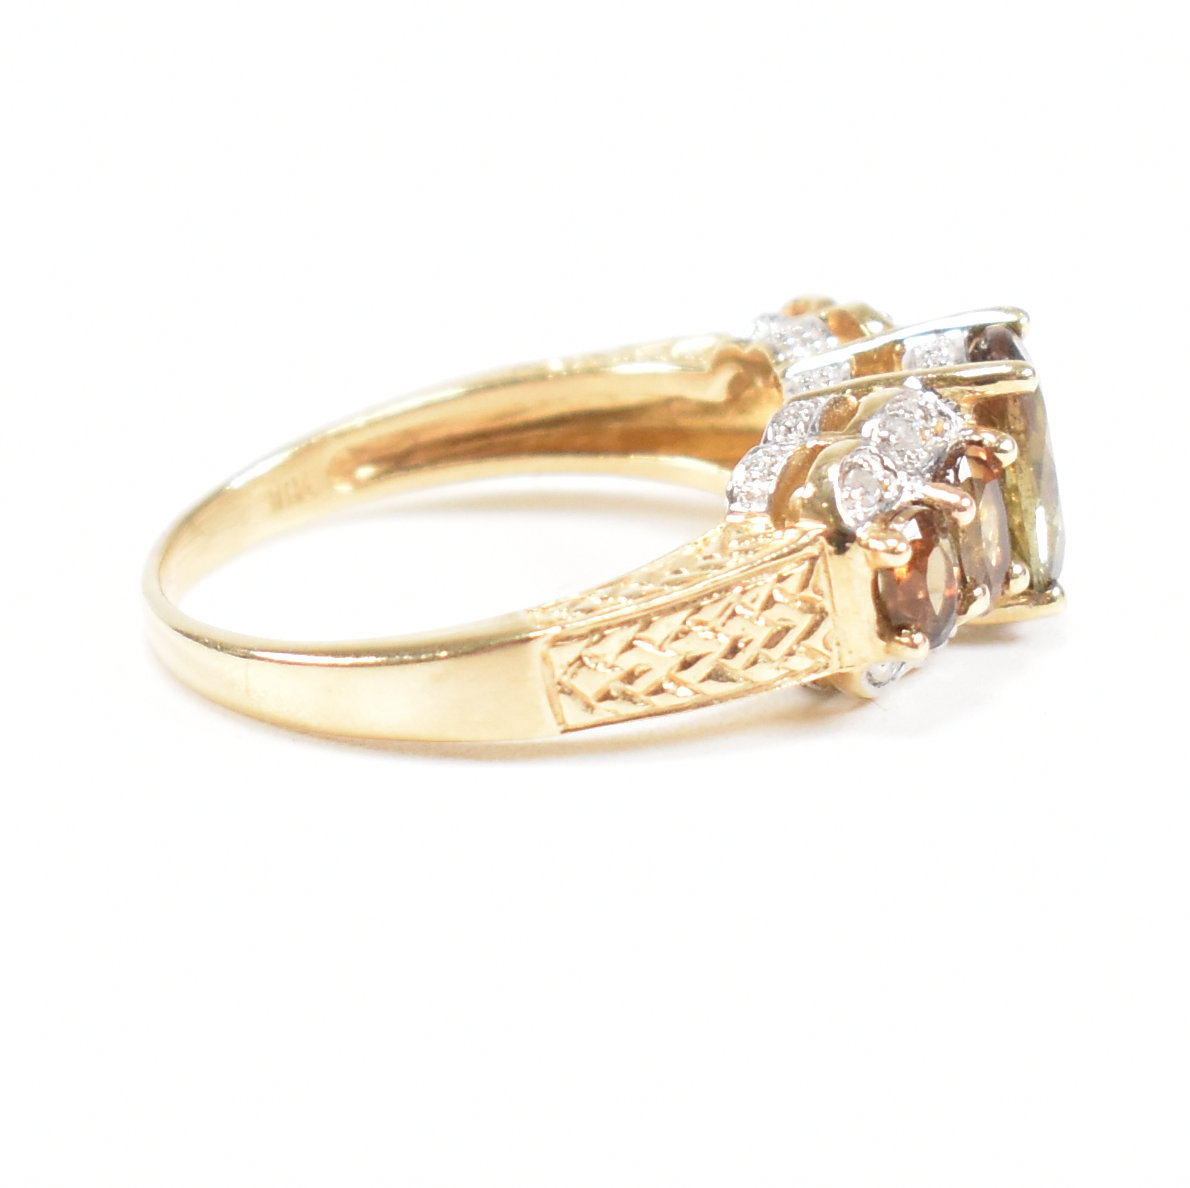 YELLOW GOLD ANDALUSITE & DIAMOND RING - Image 2 of 7